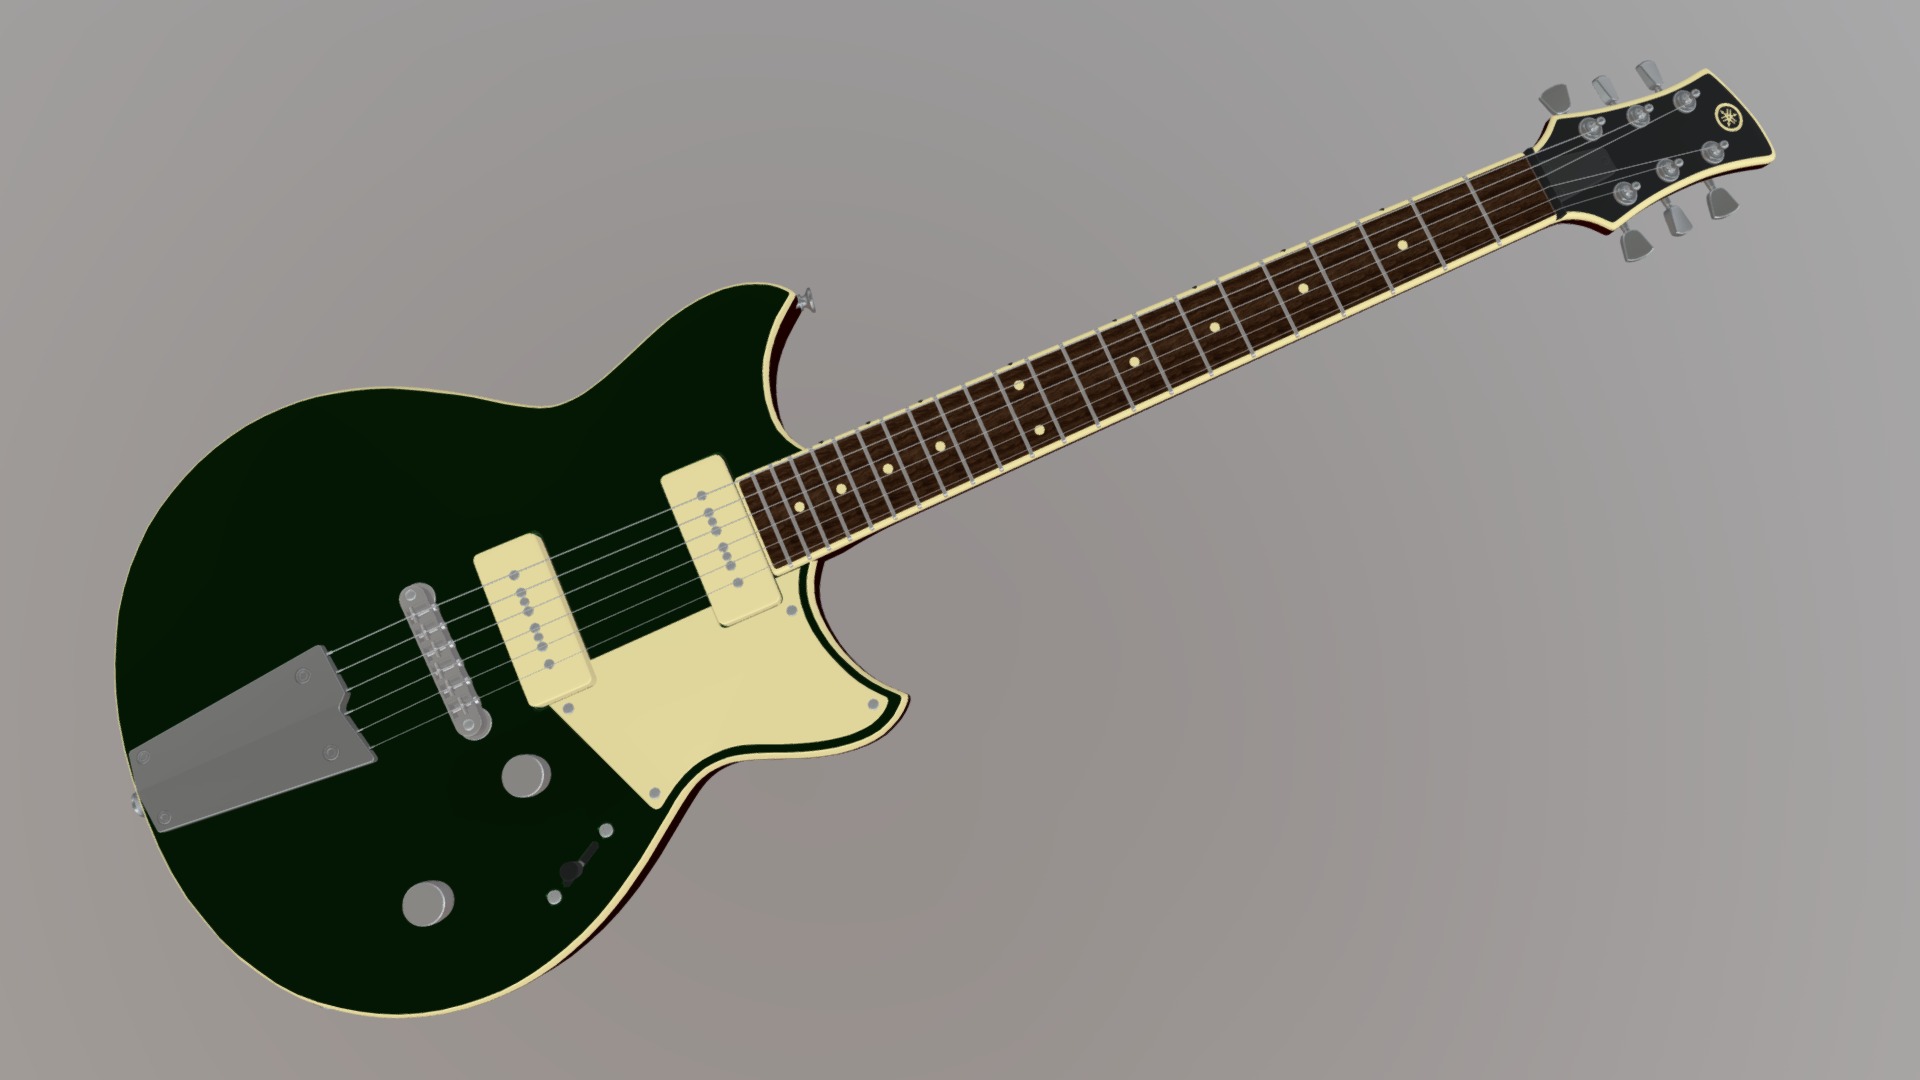 3D model Guitar - This is a 3D model of the Guitar. The 3D model is about a black and white electric guitar.